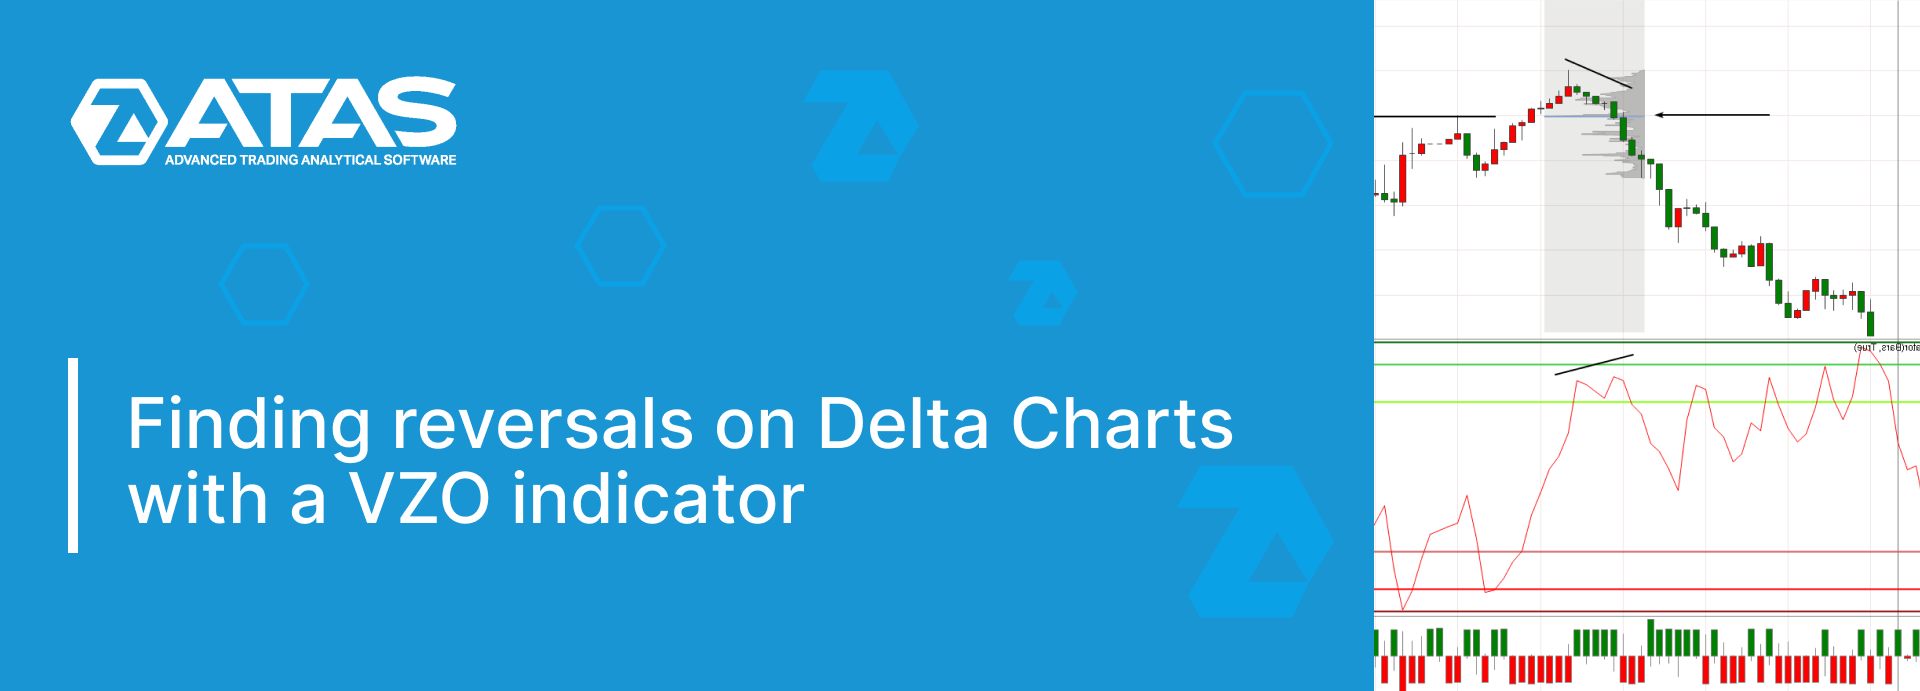 Finding reversals on Delta Charts with a VZO indicator